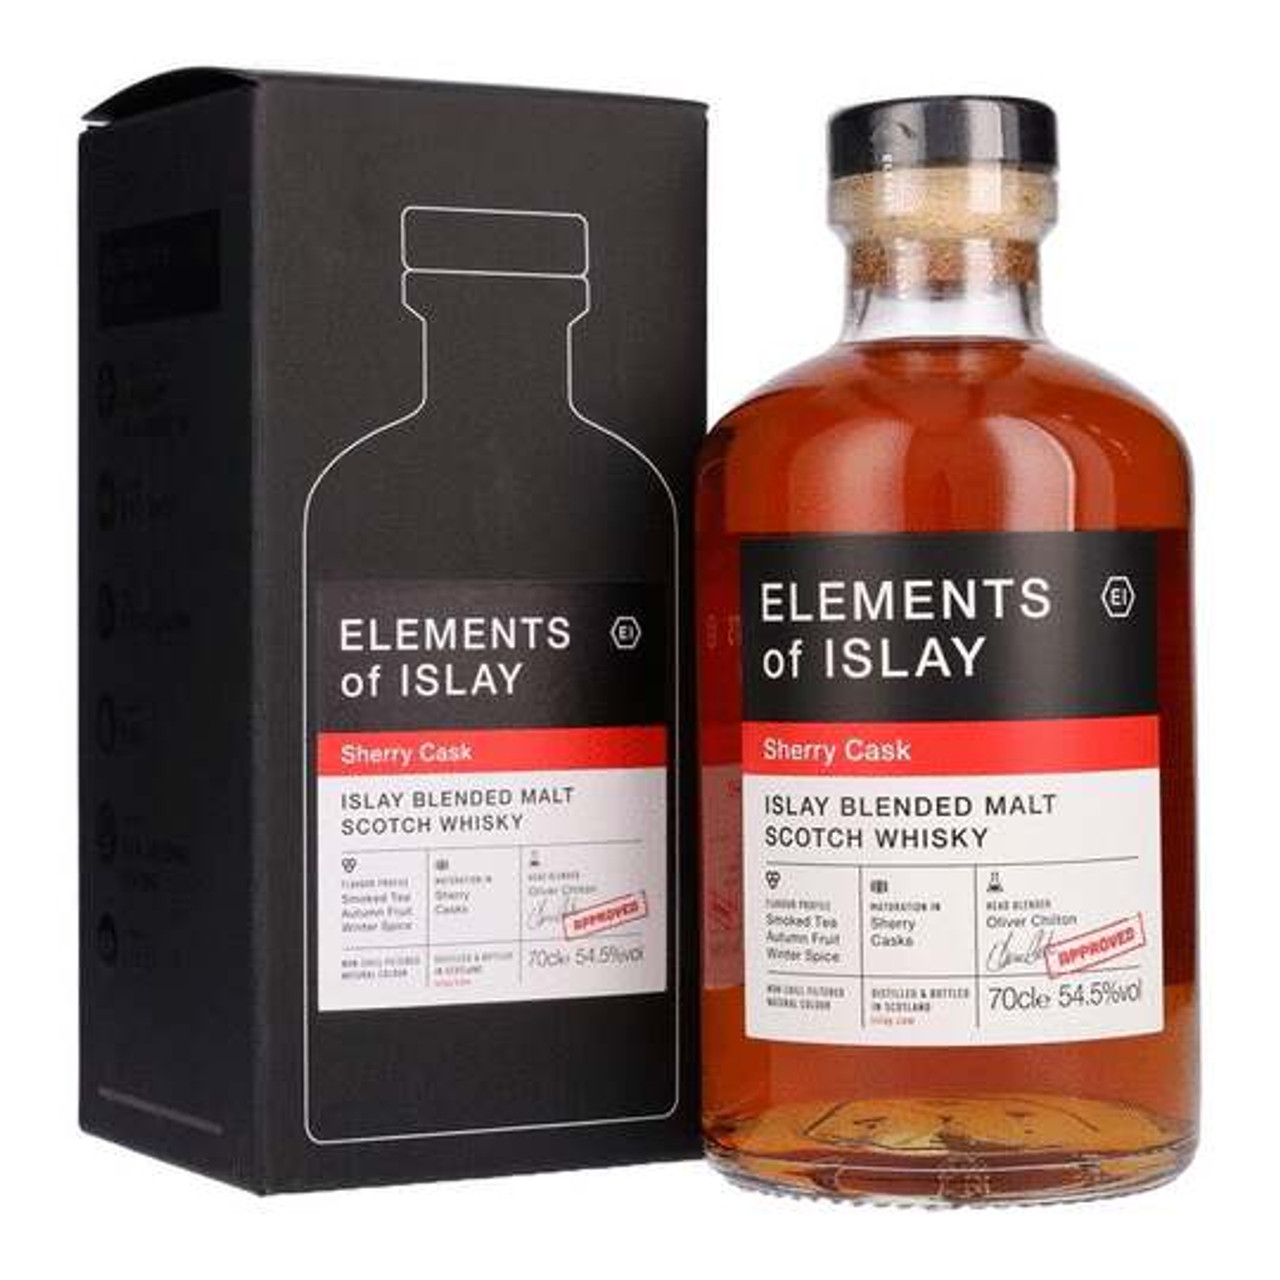 Elements of Islay, Sherry Cask